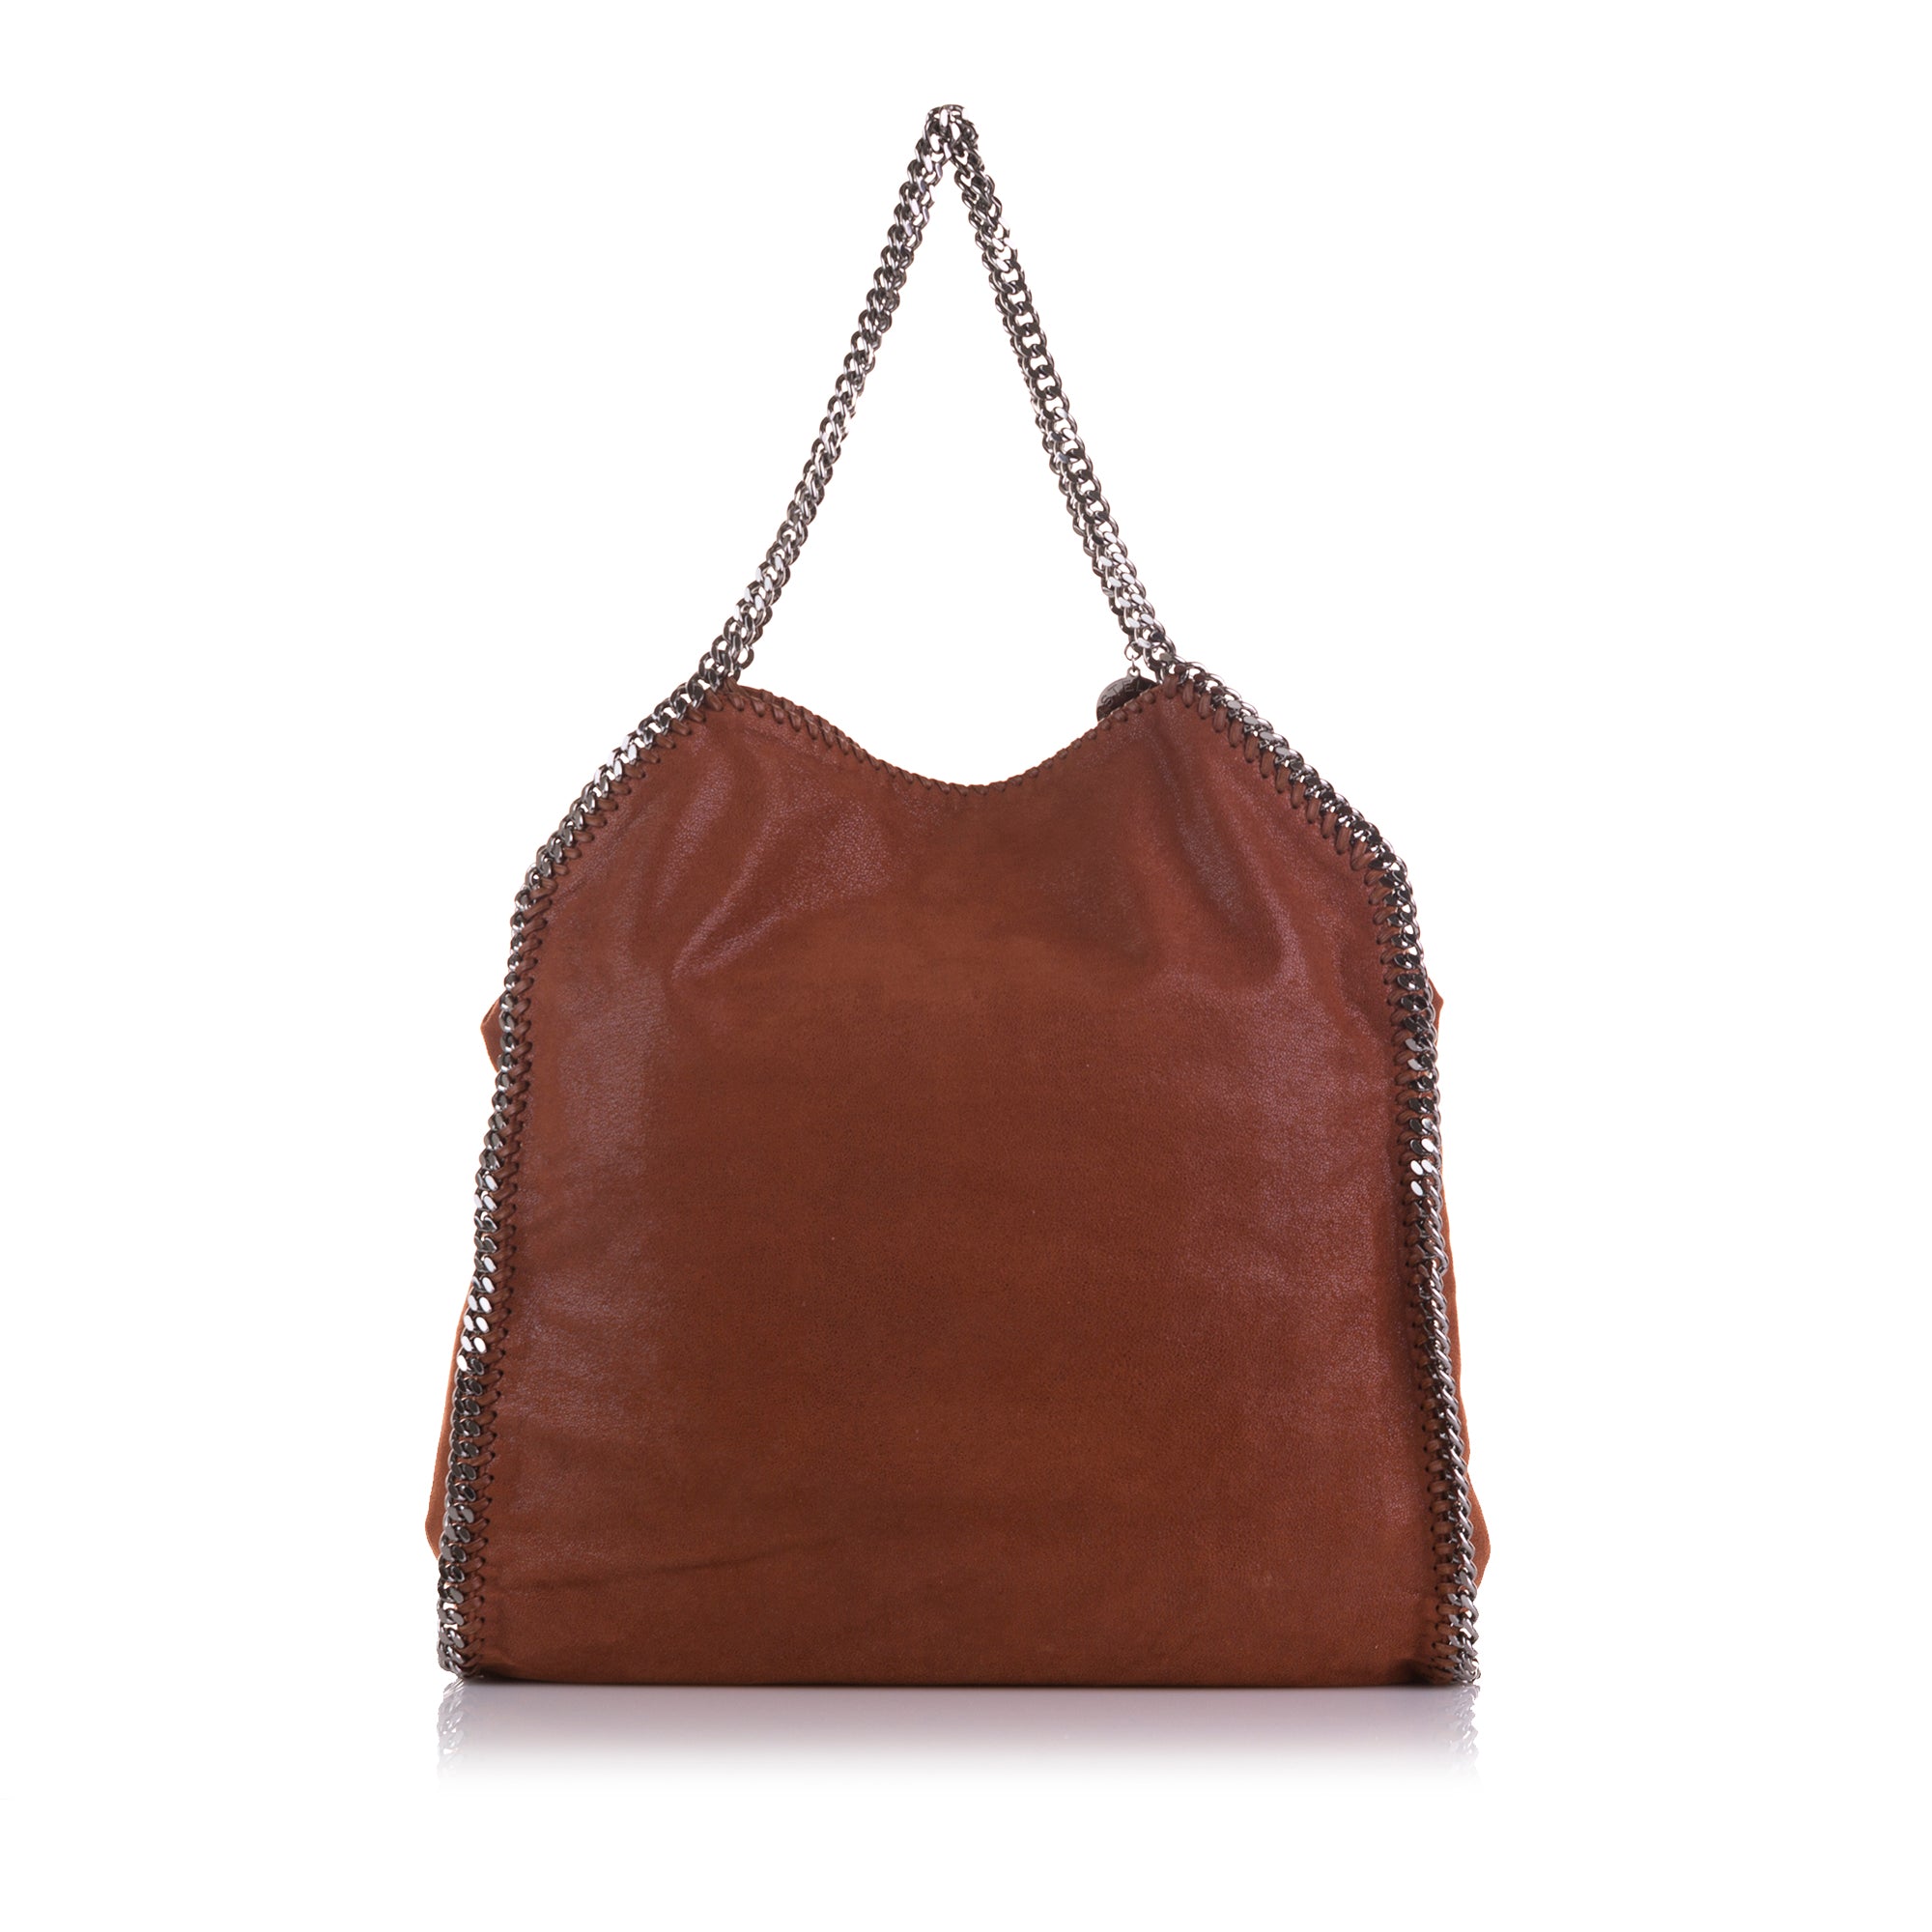 stella mccartney Falabella tote bag available on